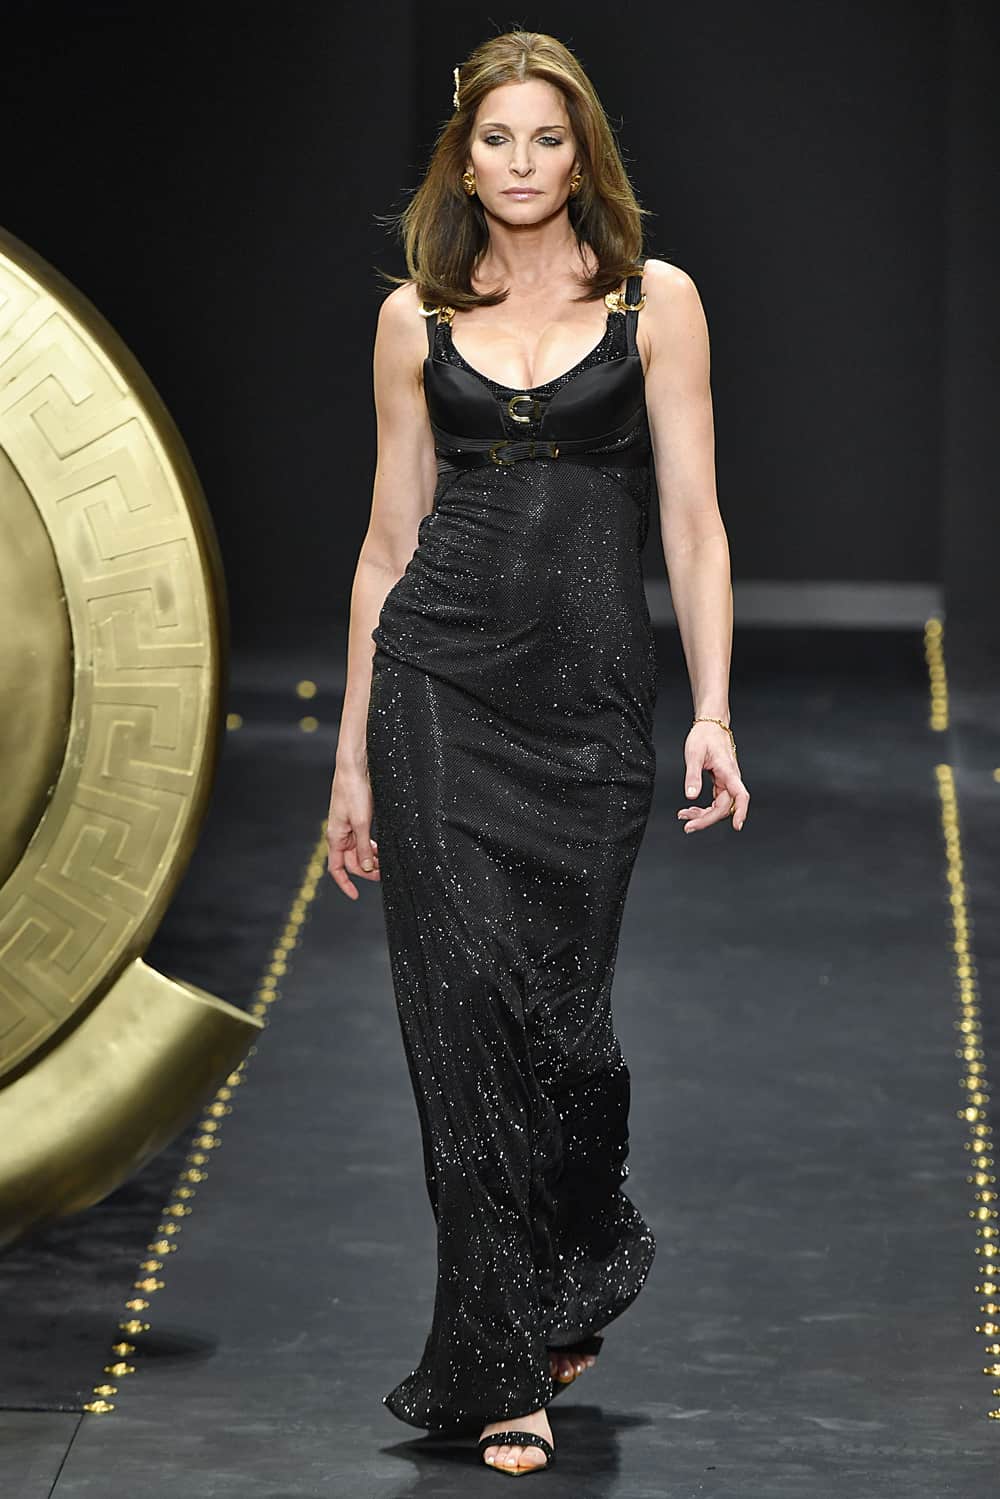 Stephanie Seymour, '90s Icon, Made a Surprise Appearance at Versace